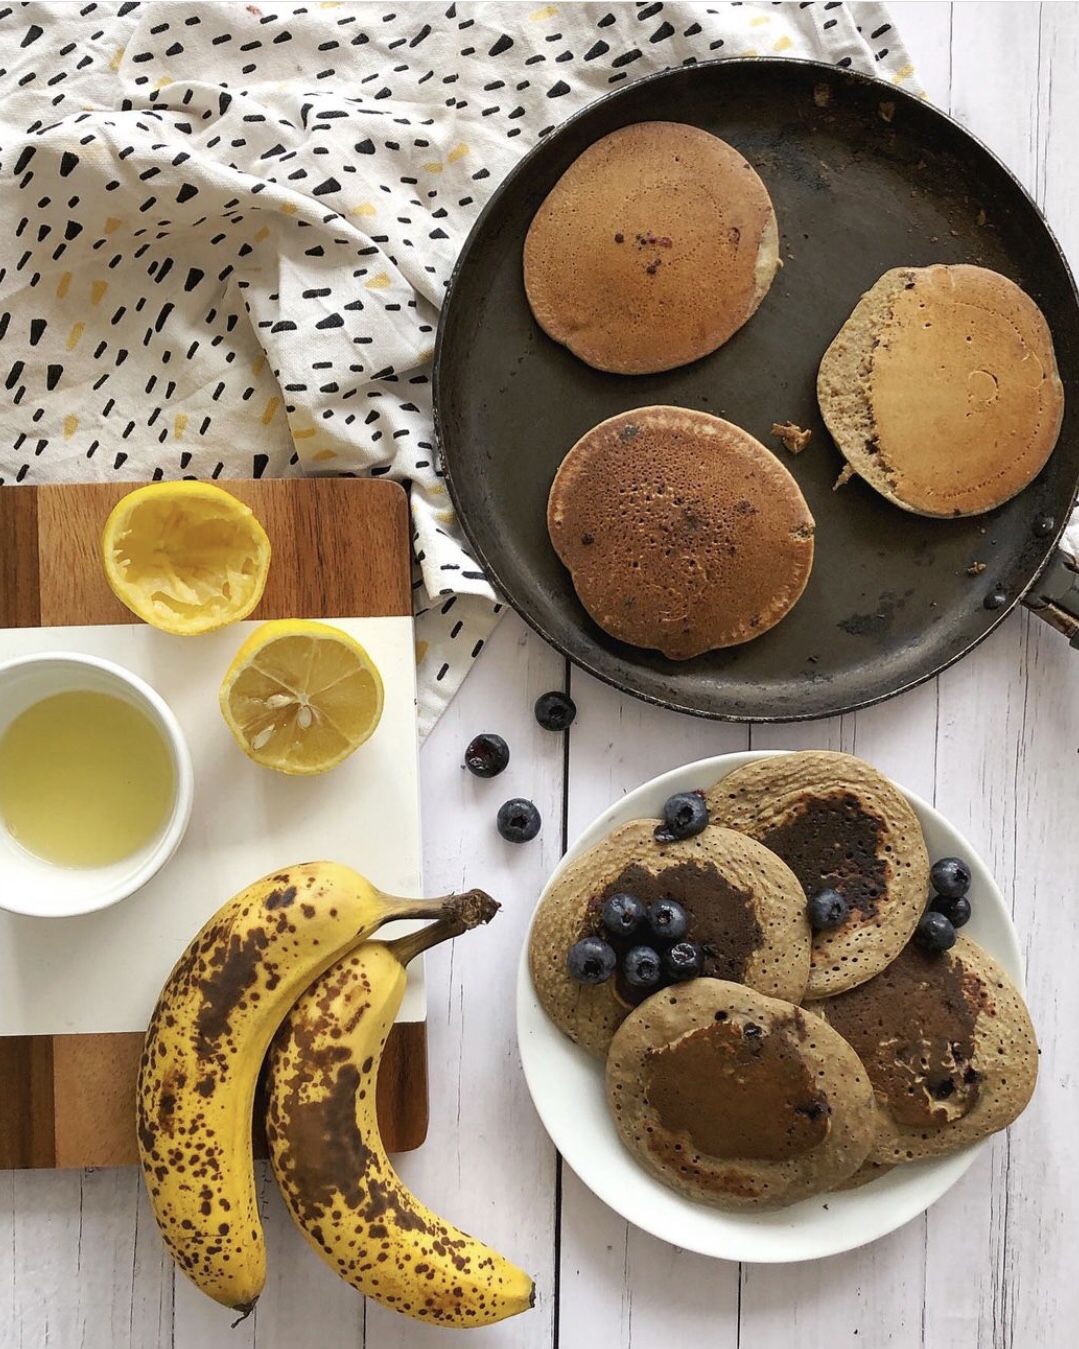 Aesthetic flatlay of blueberry and p
banana pancakes